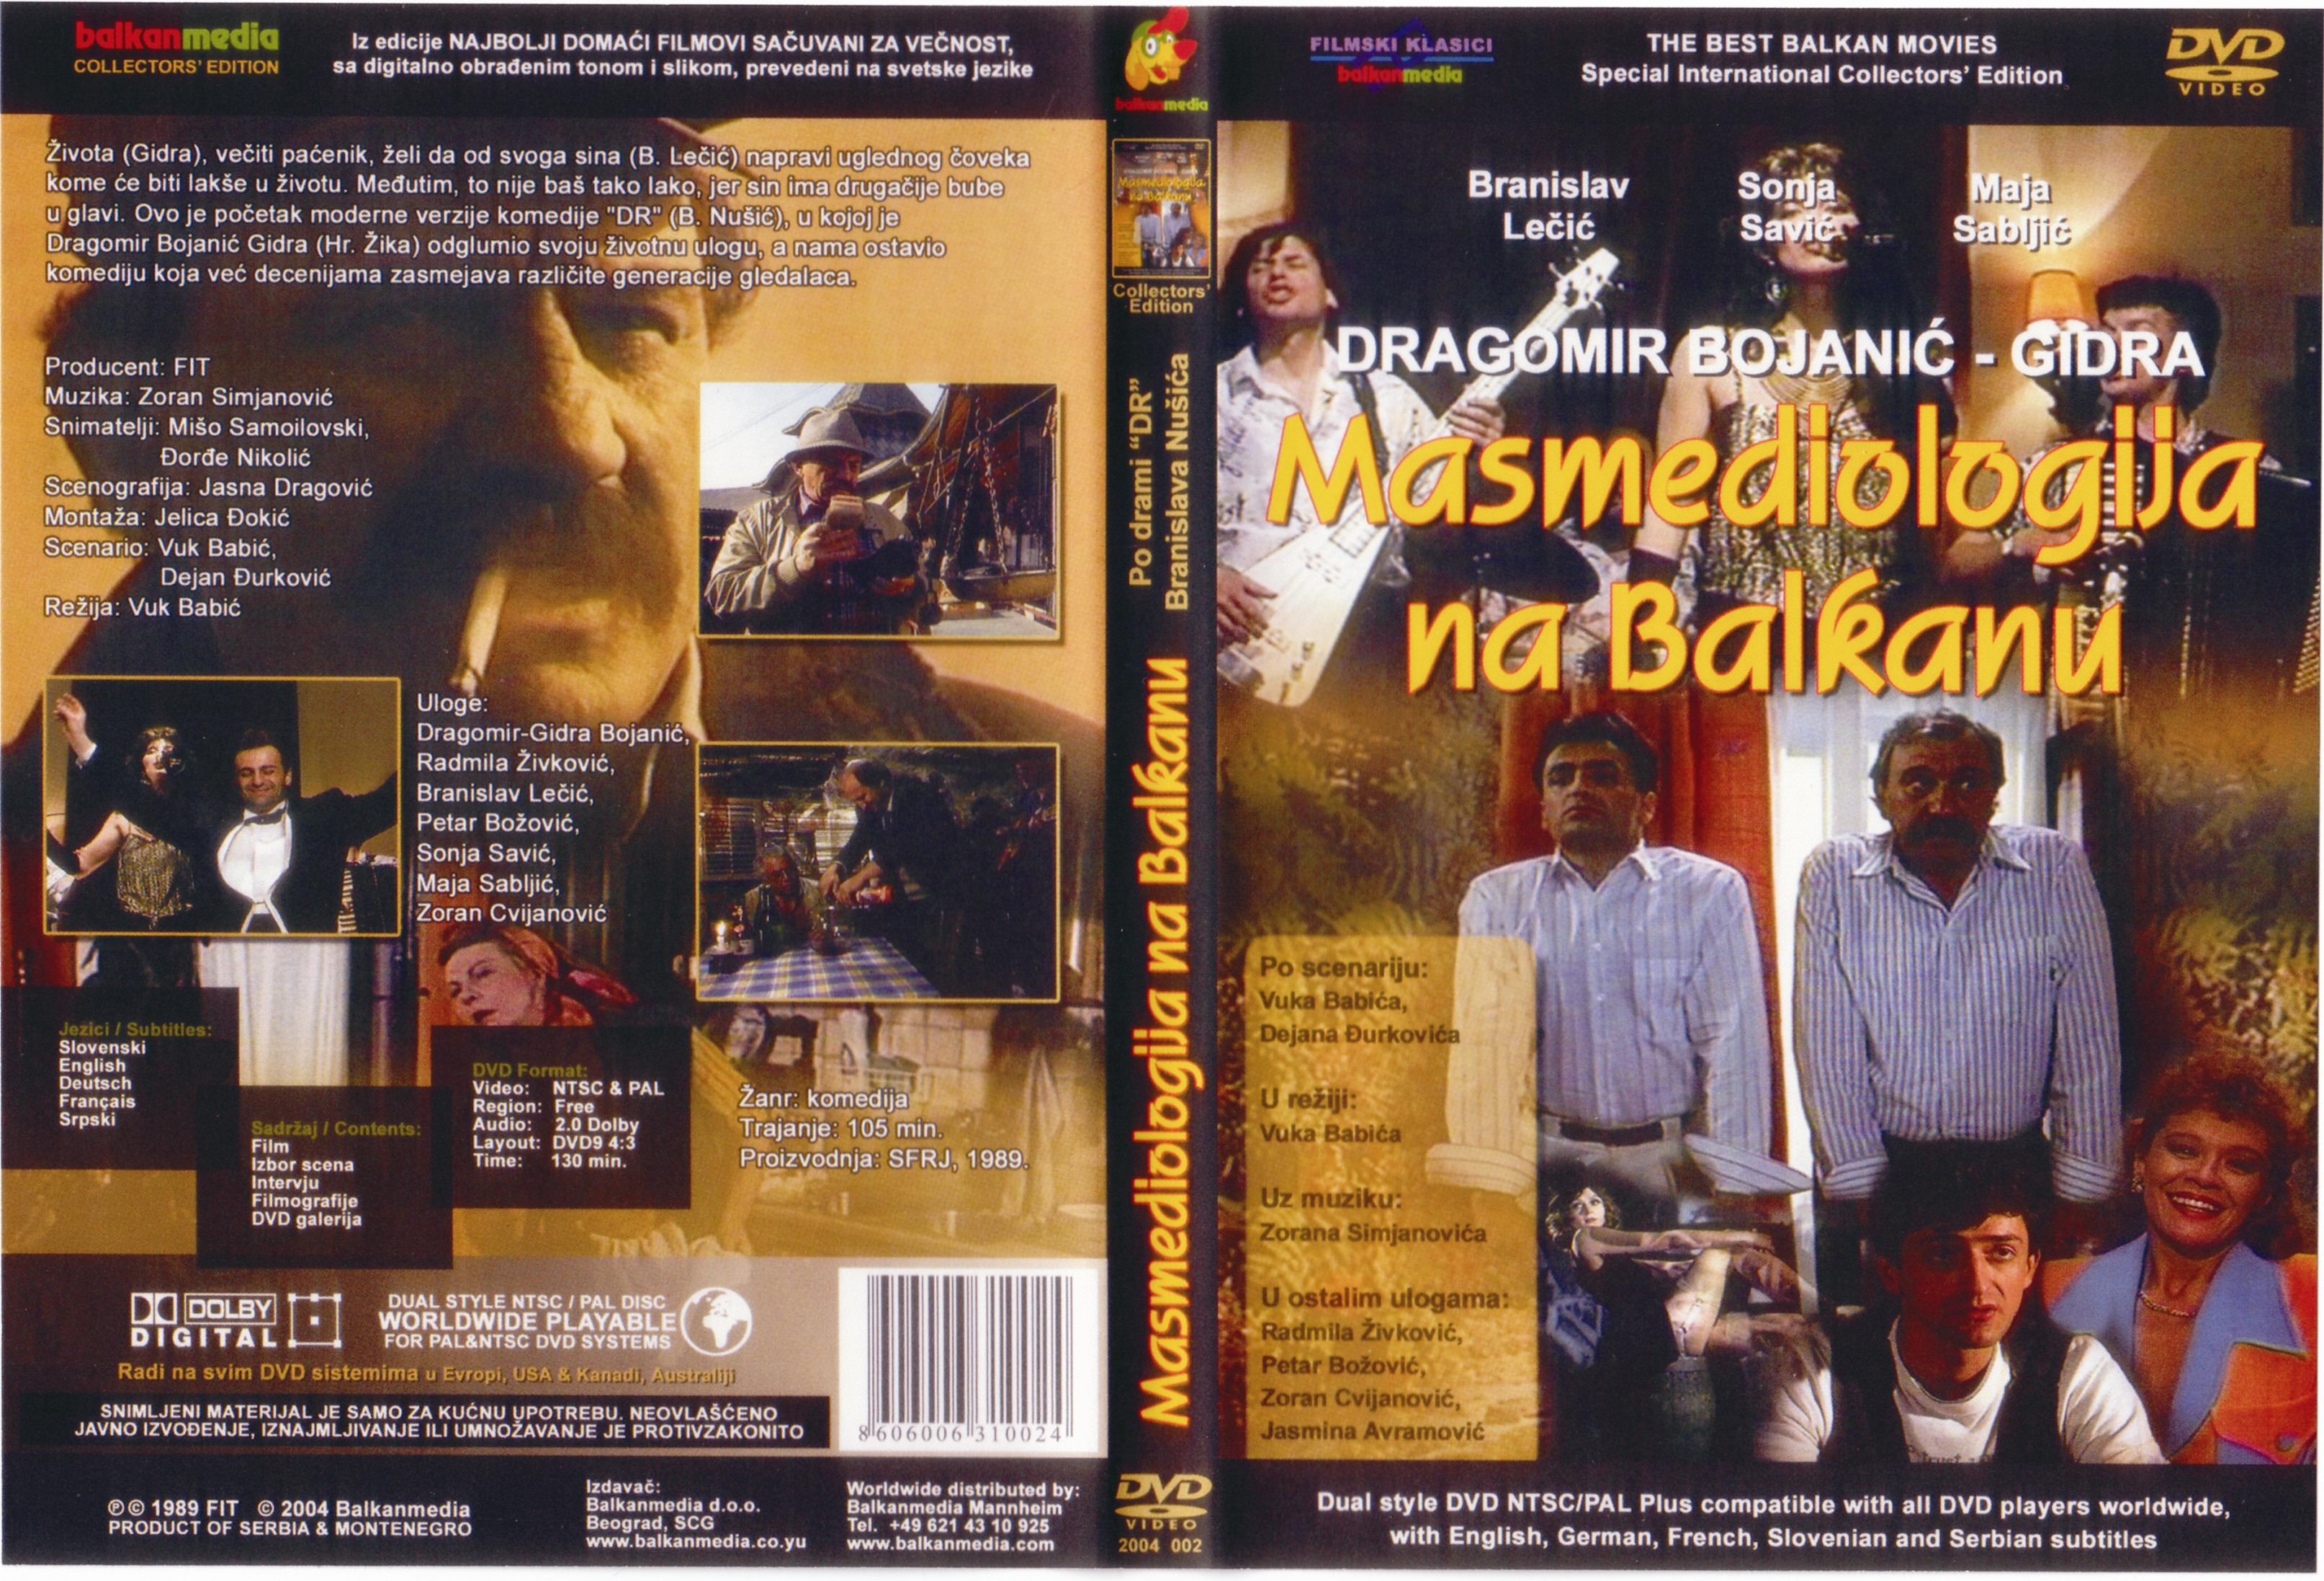 Click to view full size image -  DVD Cover - M - DVD - MESMELODIJA NA BALKANU - DVD - MESMELODIJA NA BALKANU.jpg